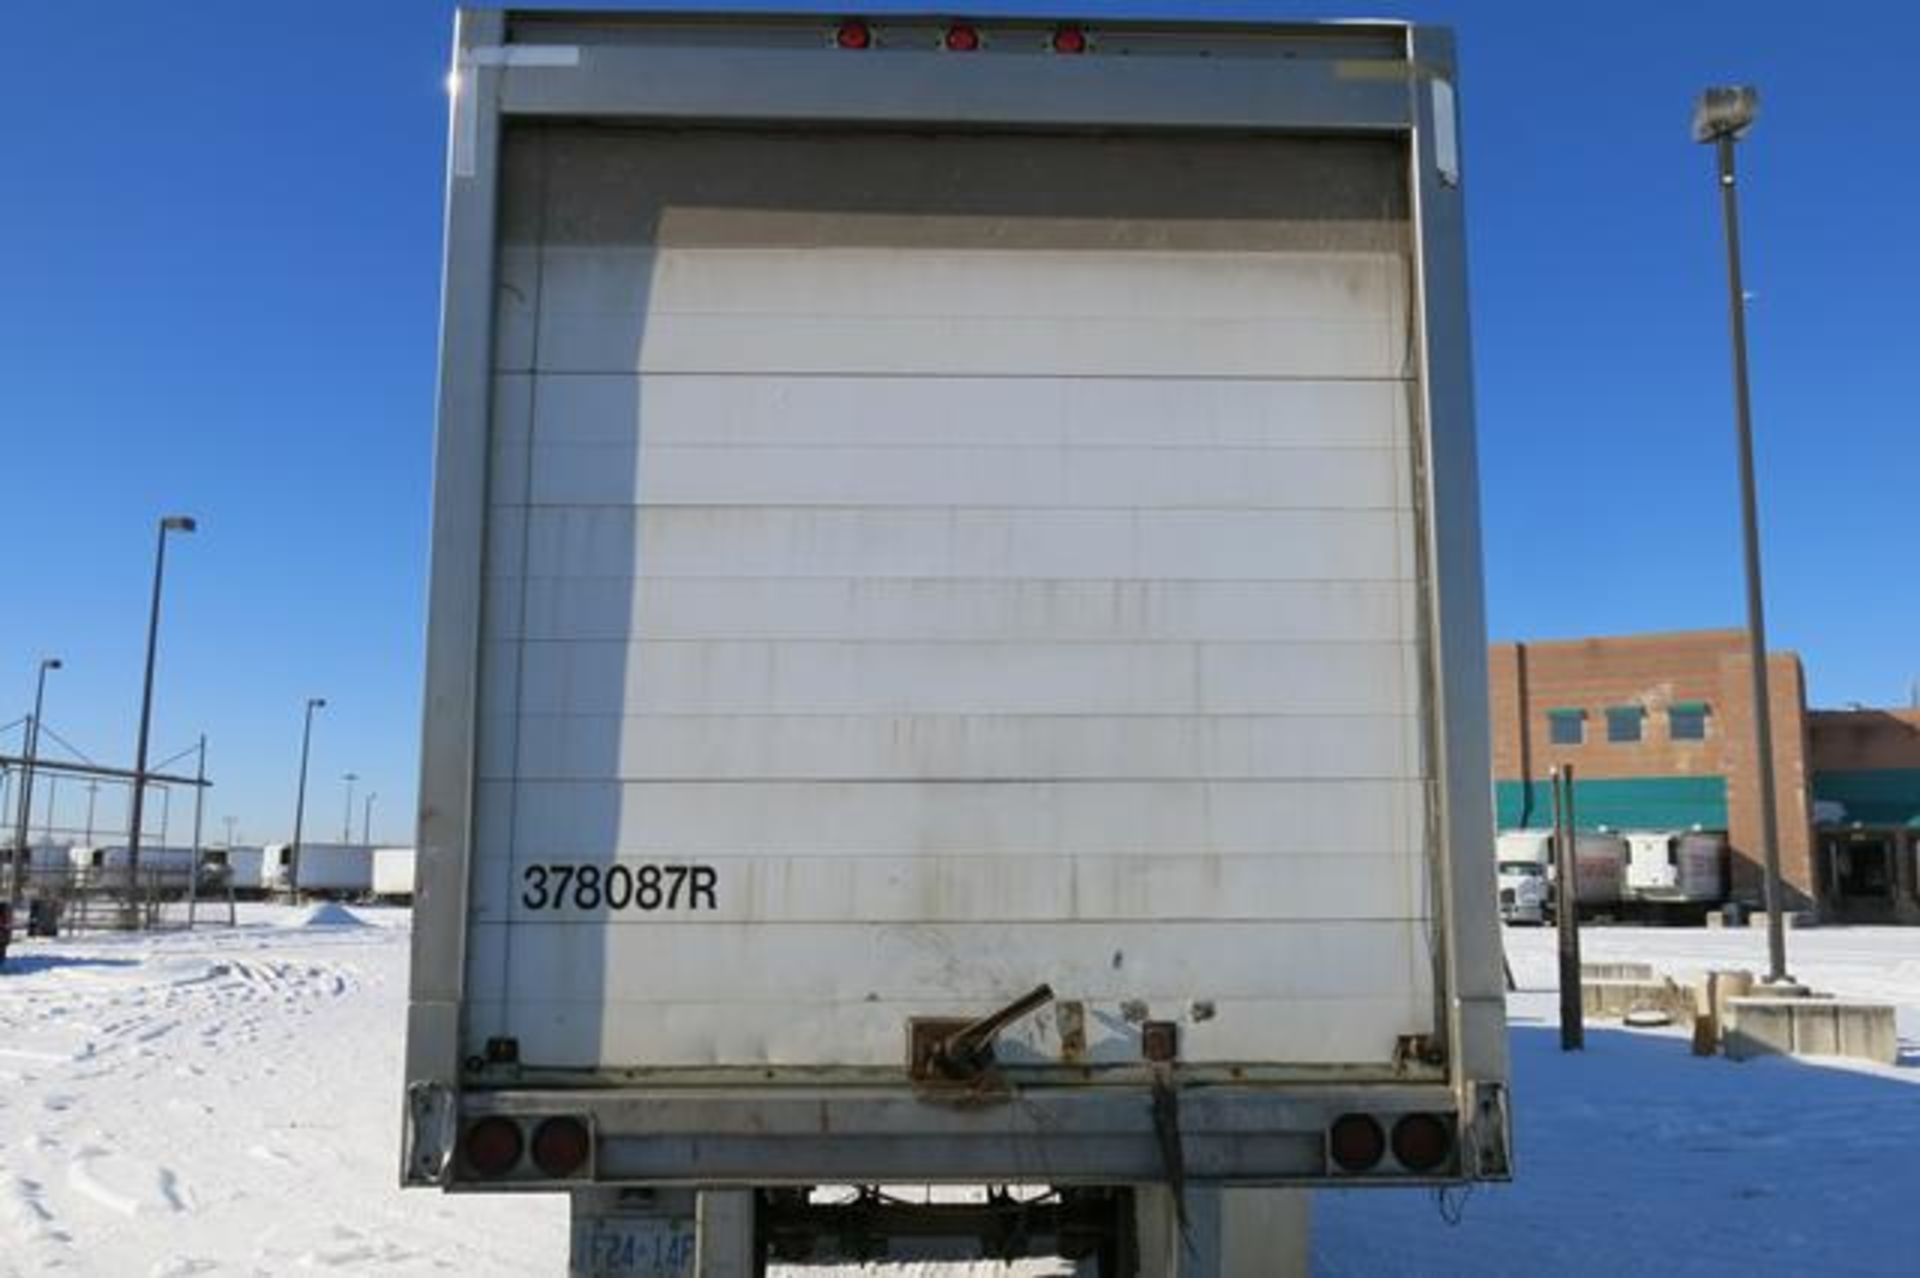 TRAILMOBILE, 53' REFRIGERATED VAN TRAILER, BARN DOORS, THERMO KING, SB-210, REEFER, 14,880 HOURS - Image 3 of 12